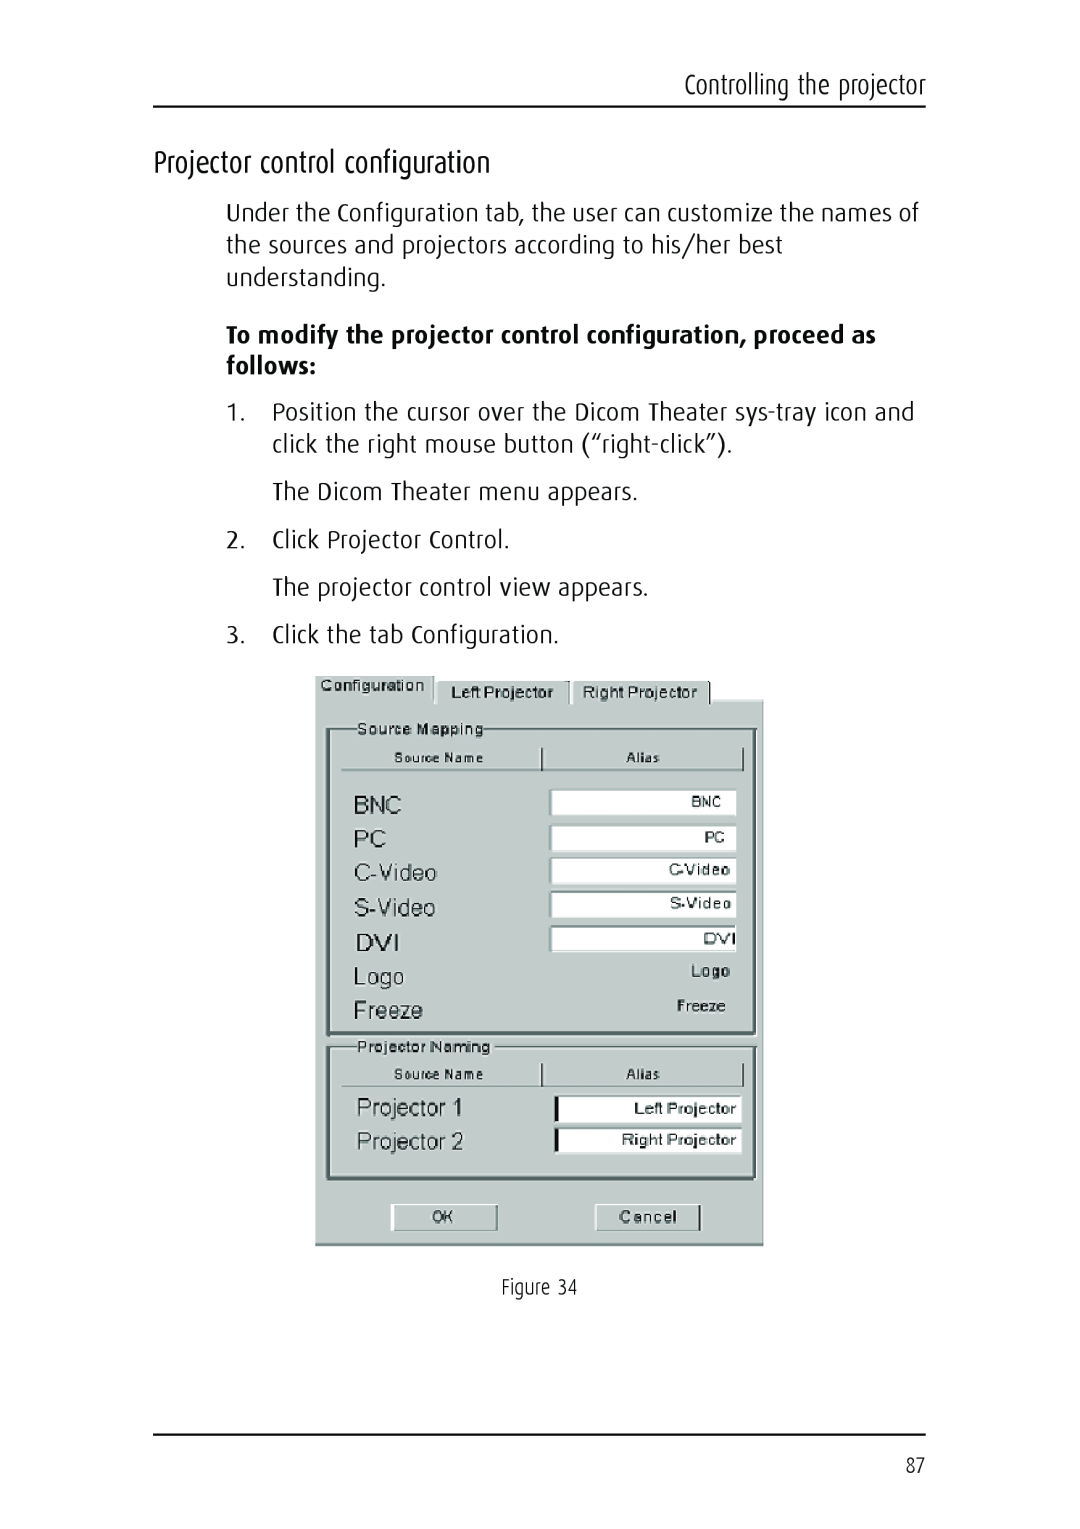 Barco MGP 15 user manual Projector control configuration, Controlling the projector 